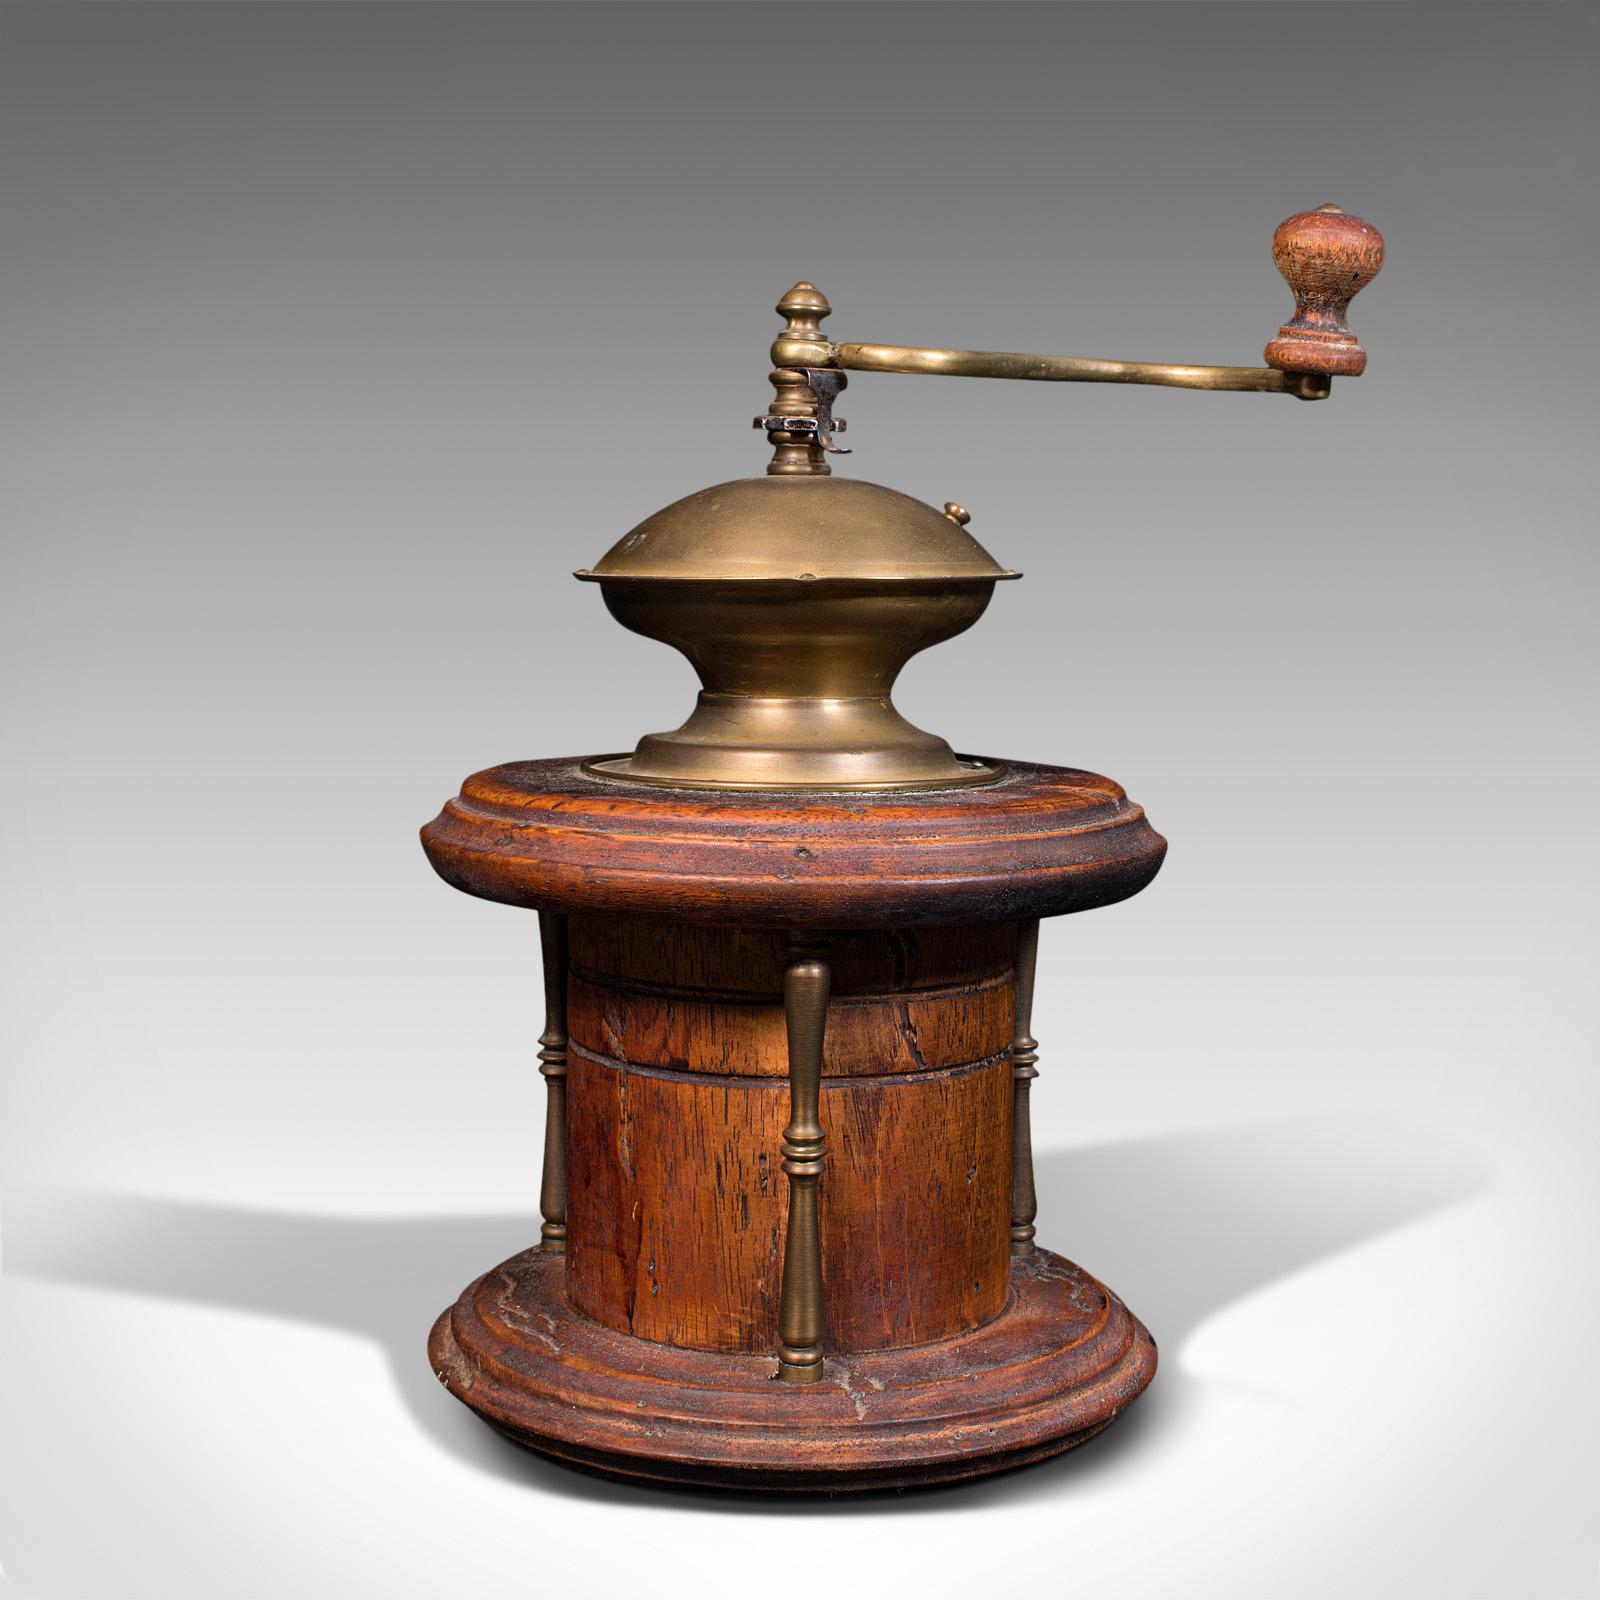 20th Century Vintage Manual Coffee Grinder, Continental, Fruitwood, Rotary Mill, Circa 1940